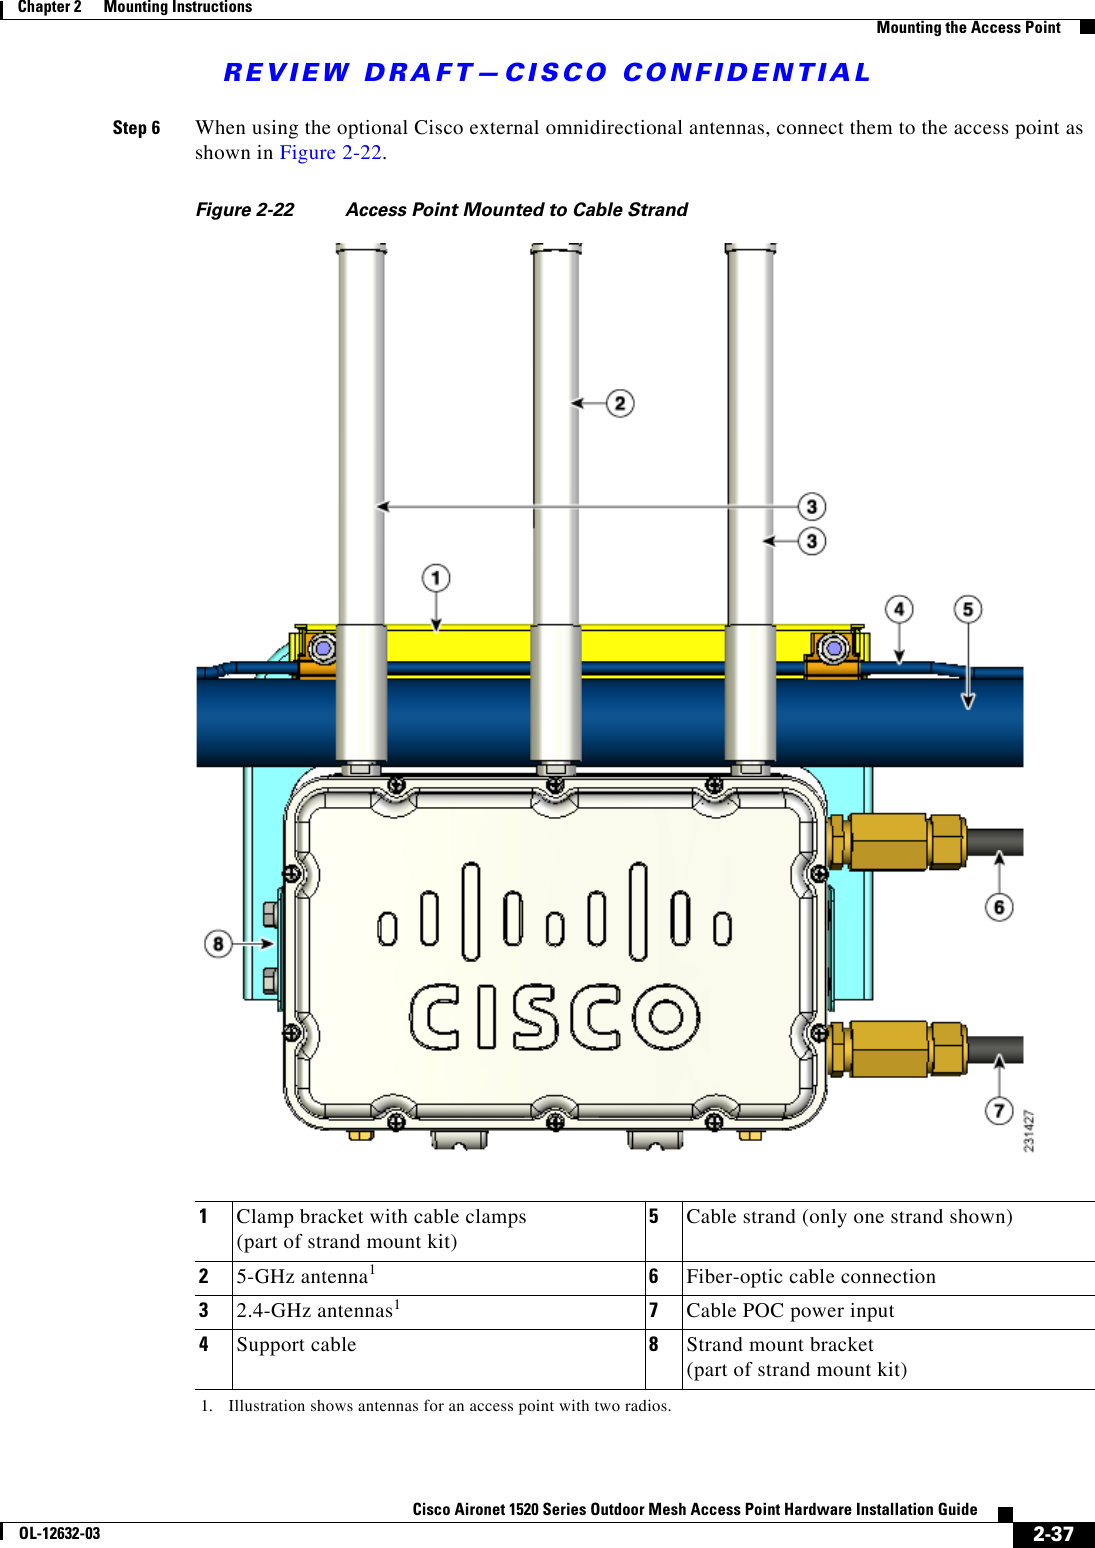 REVIEW DRAFT—CISCO CONFIDENTIAL2-37Cisco Aironet 1520 Series Outdoor Mesh Access Point Hardware Installation GuideOL-12632-03Chapter 2      Mounting Instructions  Mounting the Access PointStep 6 When using the optional Cisco external omnidirectional antennas, connect them to the access point as shown in Figure 2-22. Figure 2-22 Access Point Mounted to Cable Strand1Clamp bracket with cable clamps (part of strand mount kit)5Cable strand (only one strand shown)25-GHz antenna11. Illustration shows antennas for an access point with two radios.6Fiber-optic cable connection32.4-GHz antennas17Cable POC power input4Support cable  8Strand mount bracket  (part of strand mount kit)